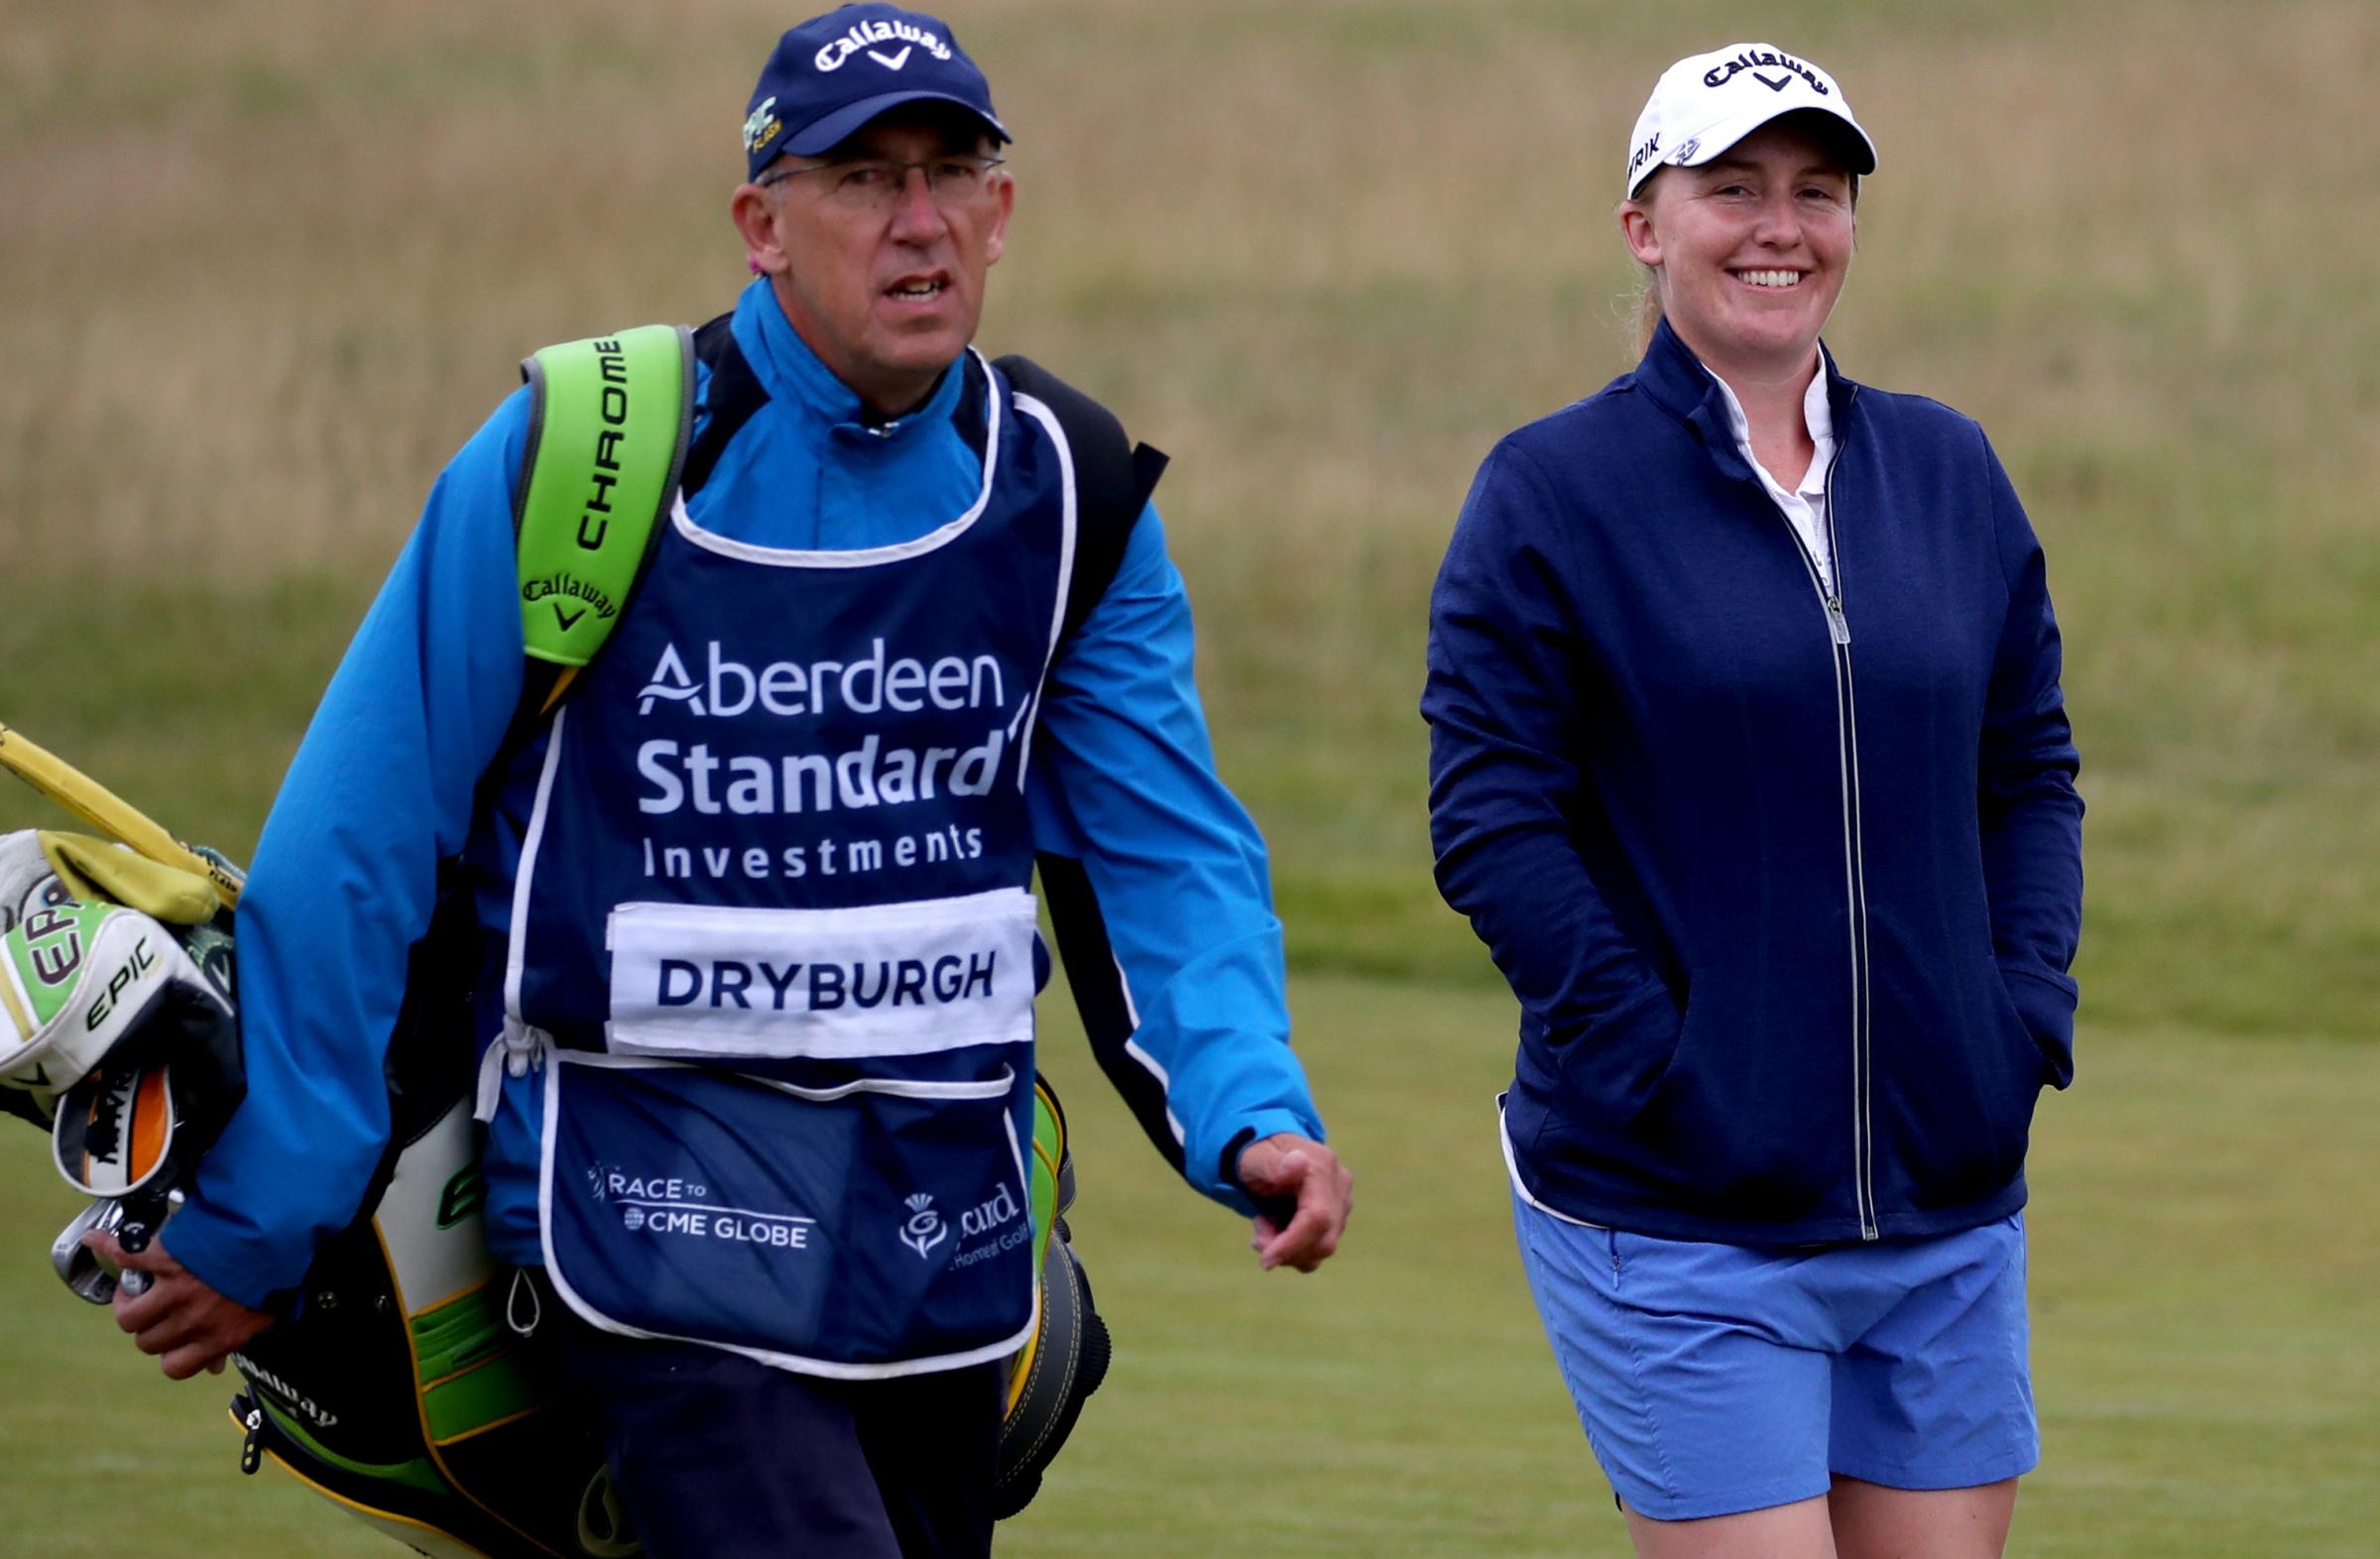 Scotlands Gemma Dryburgh (right) and her caddy during day two of the Aberdeen Standard Investments Ladies Scottish Open at The Renaissance Club, North Berwick. (PA)